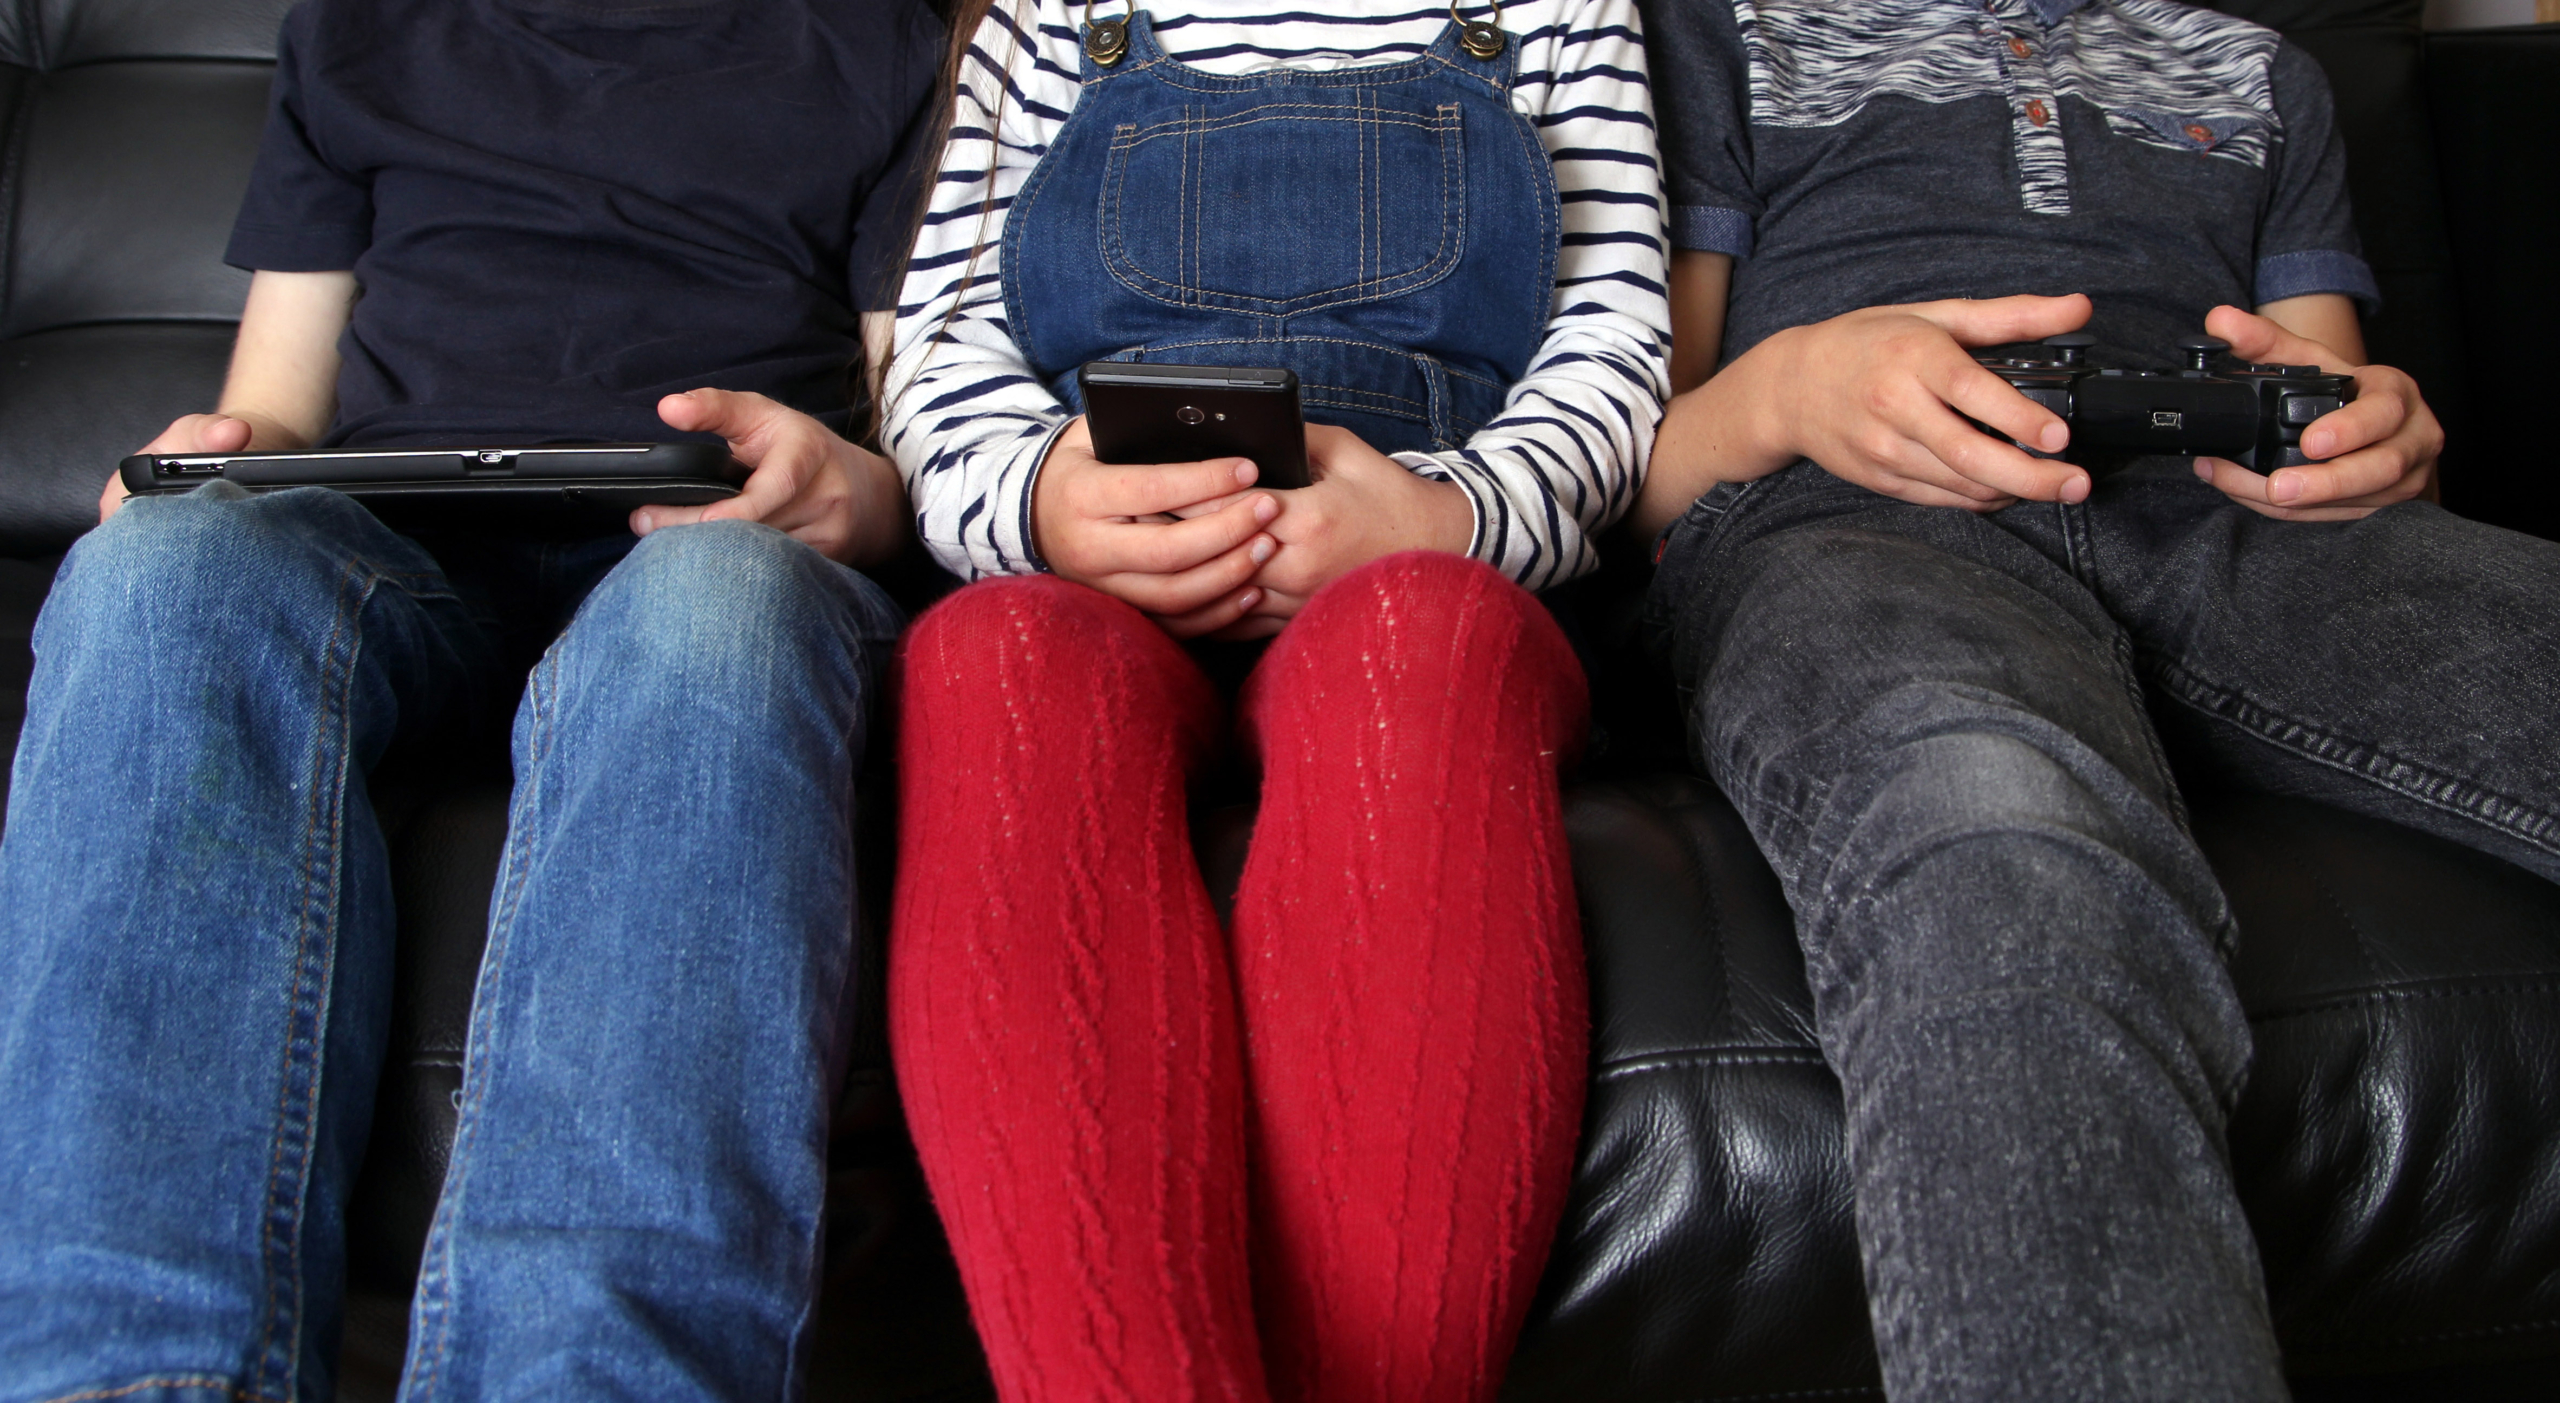 three children on electronic devices